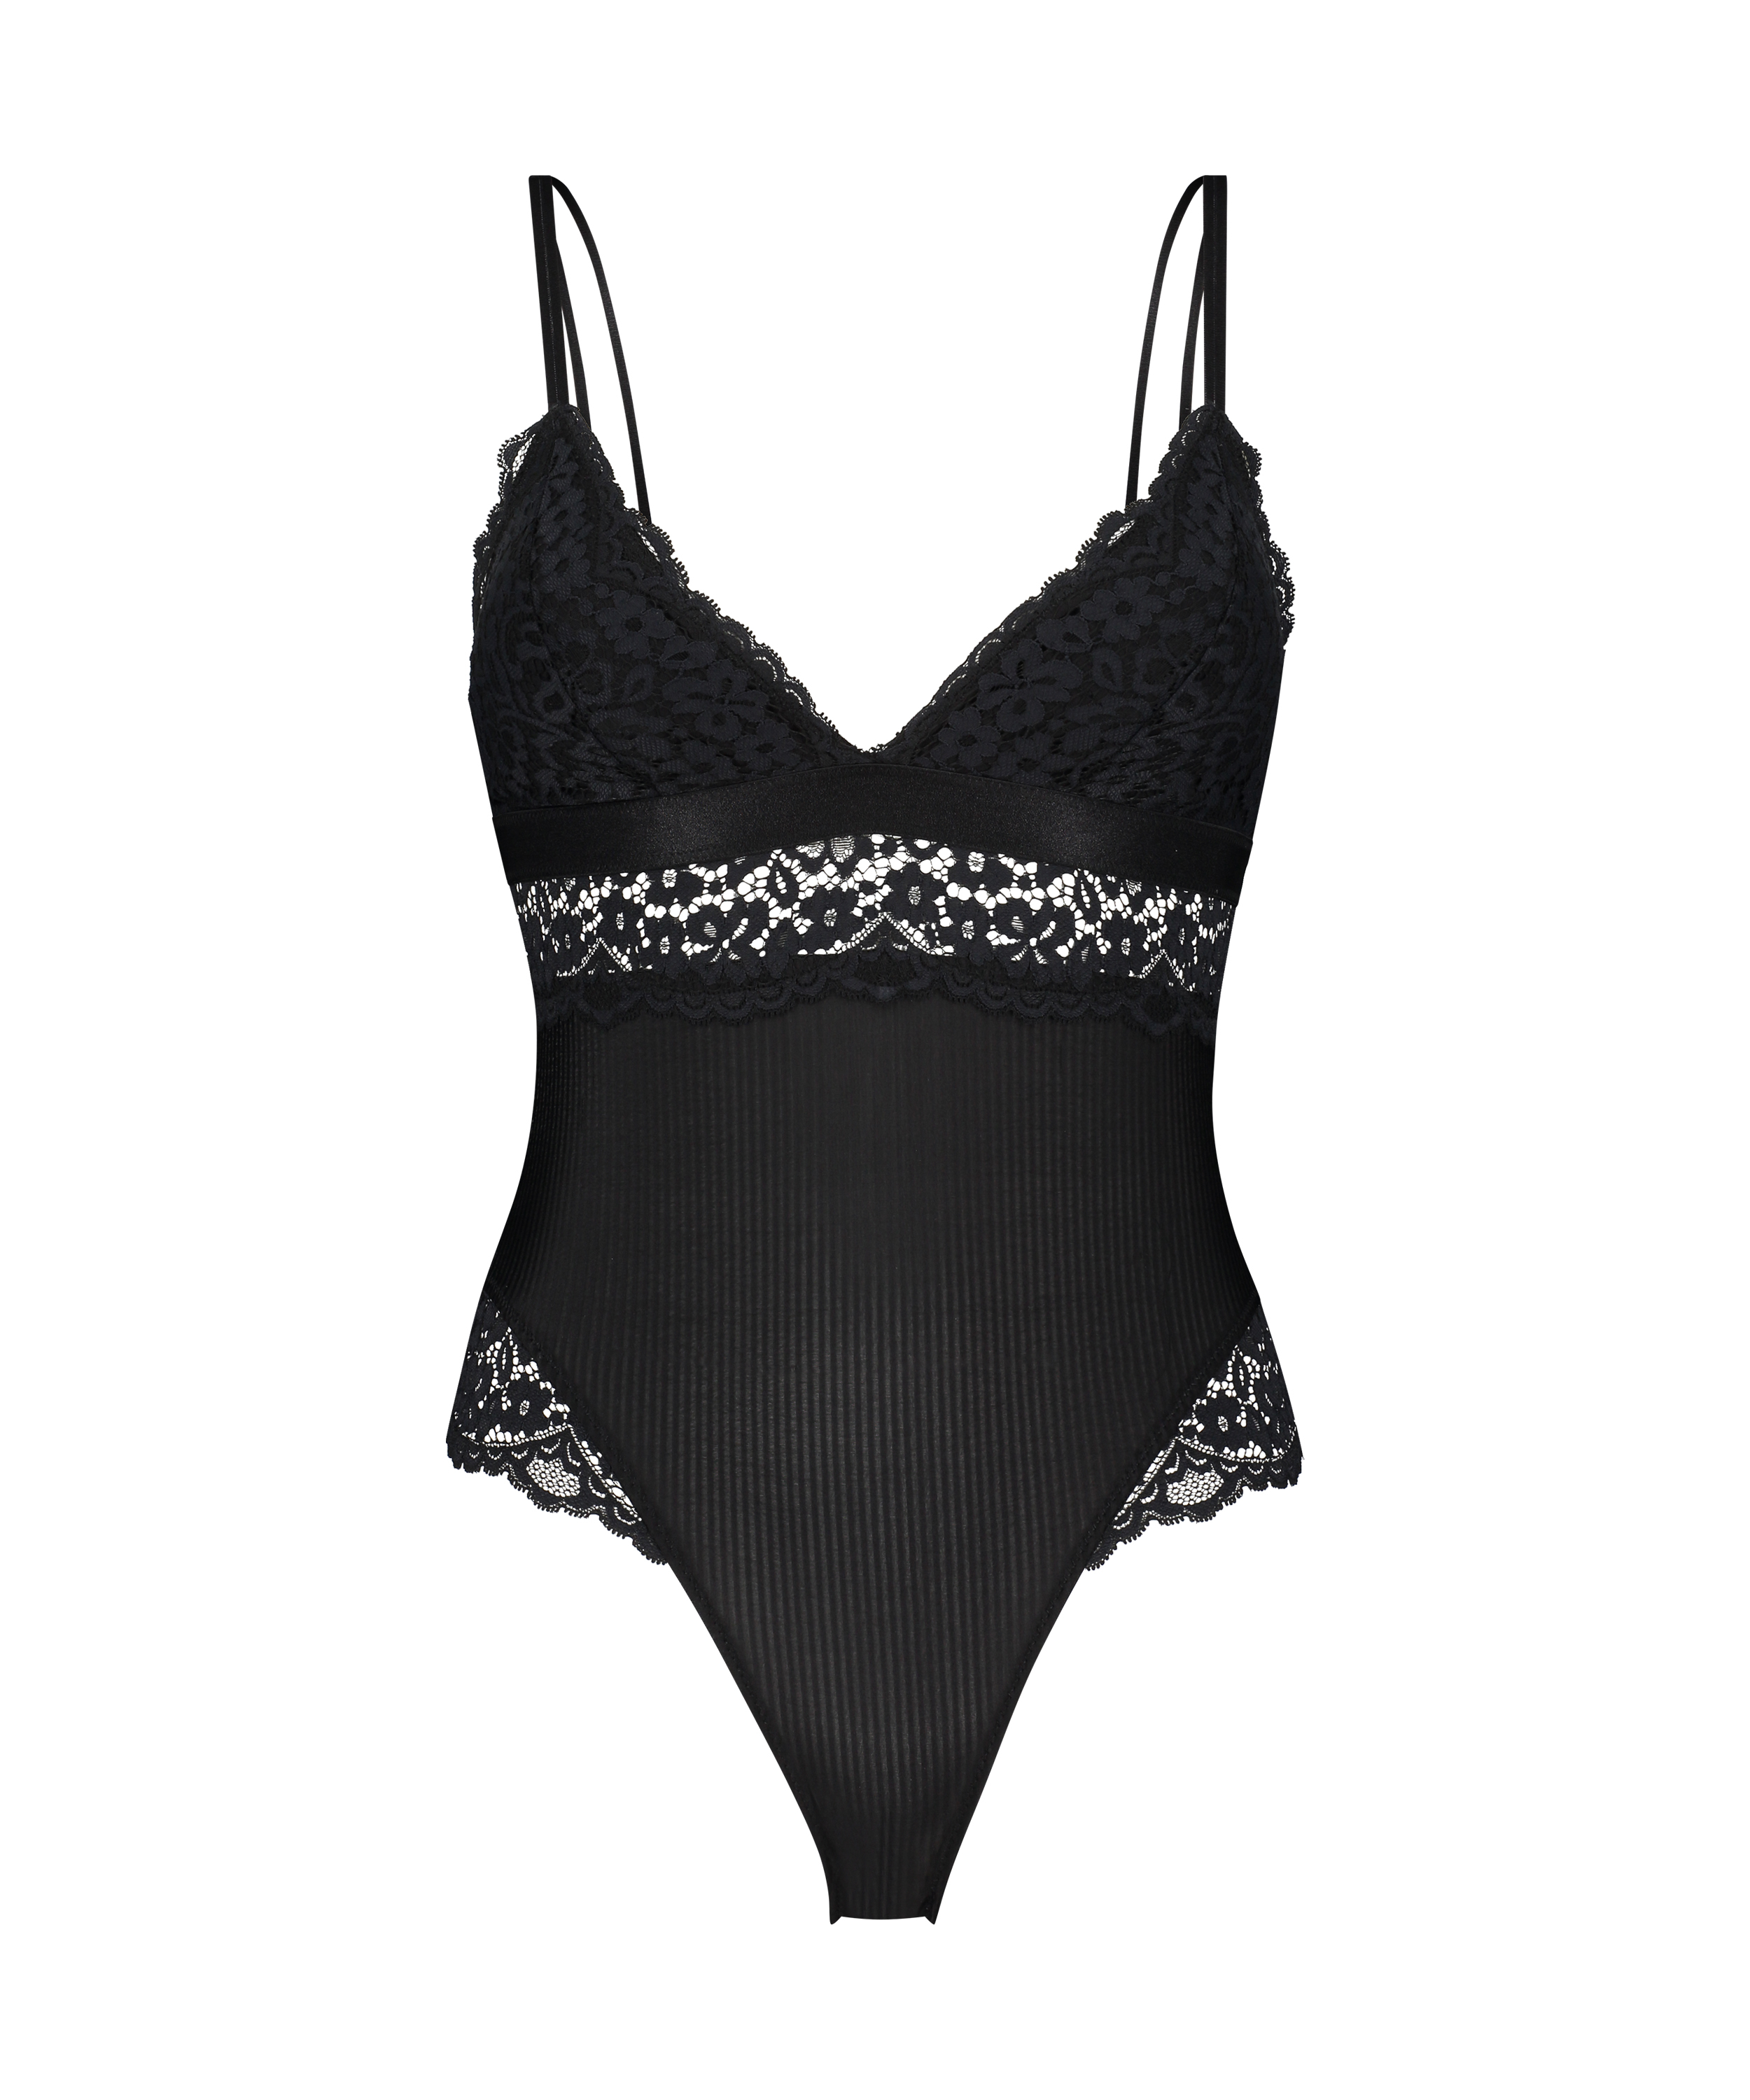 Rose padded body for £30 - Bodies & Bustiers - Hunkemöller